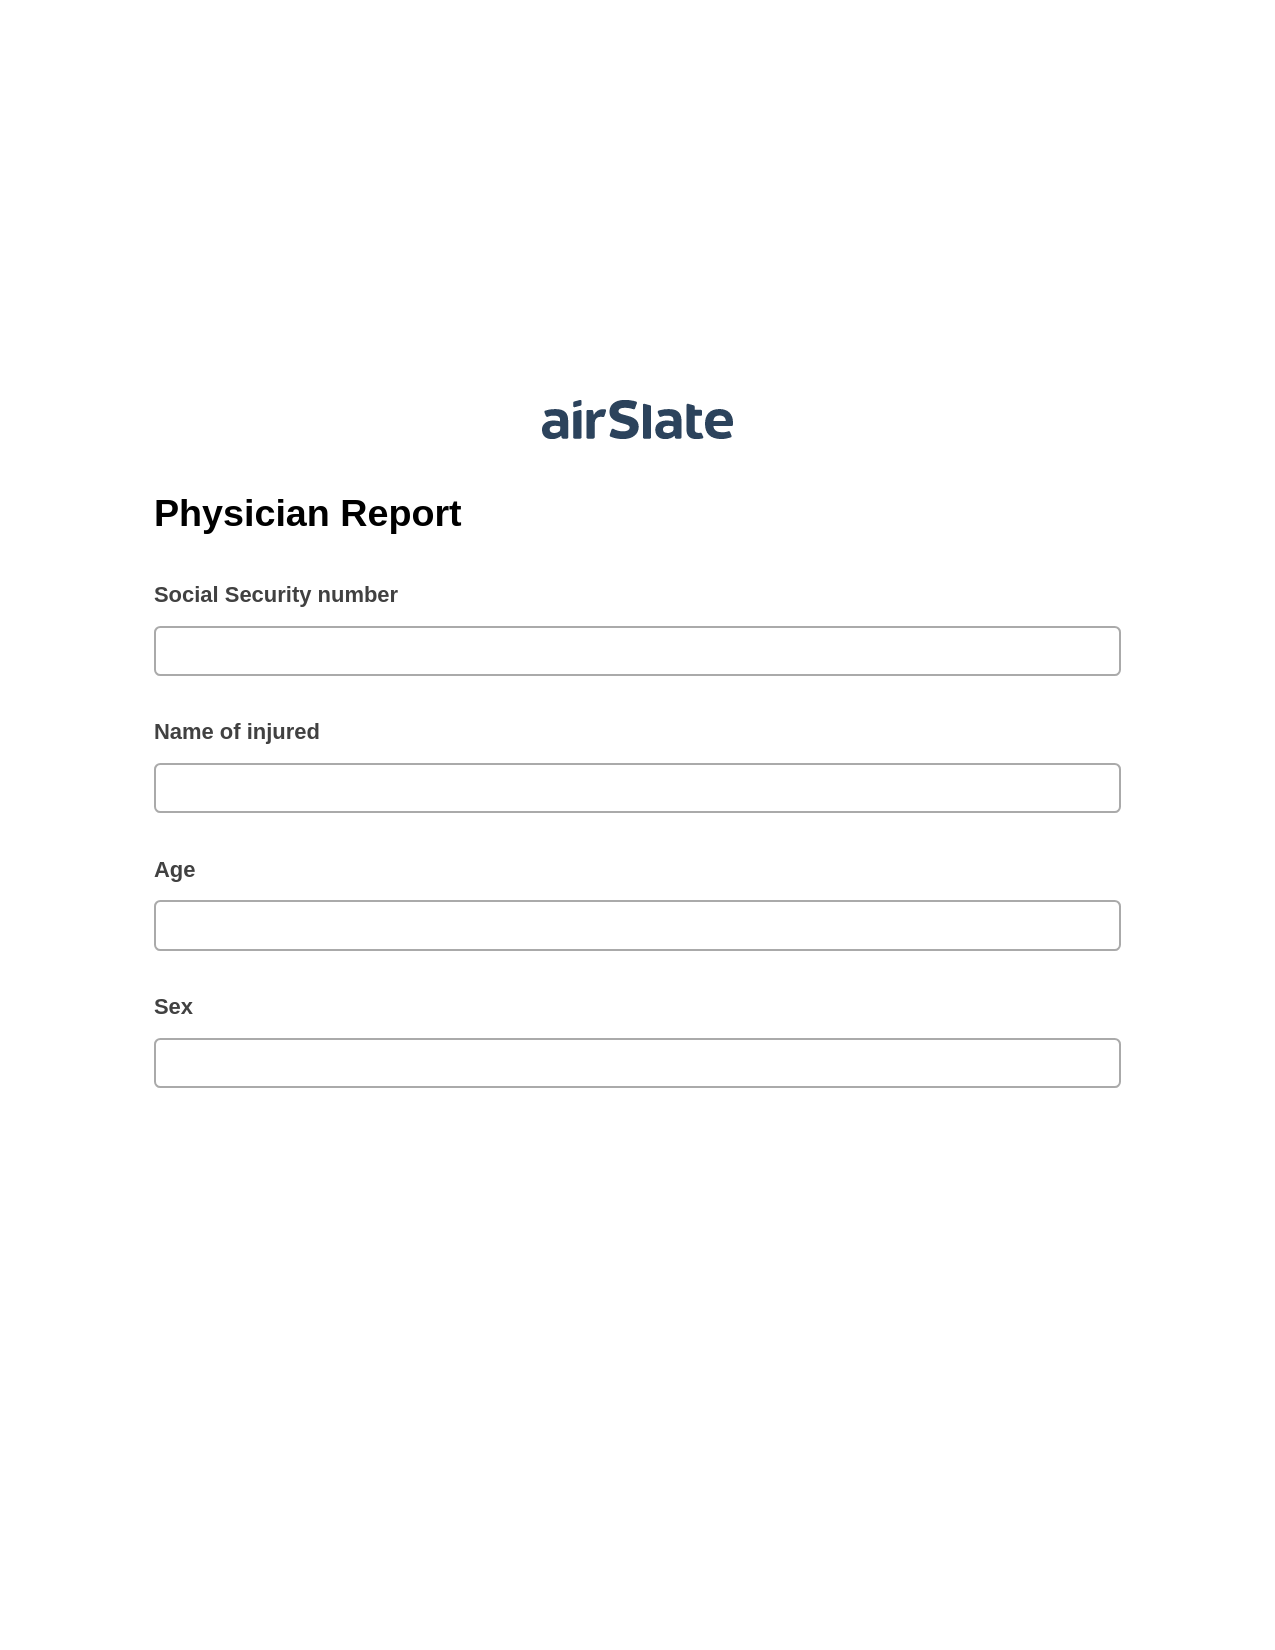 Physician Report Pre-fill Dropdowns from Airtable, Create NetSuite Record bot, Archive to Google Drive Bot